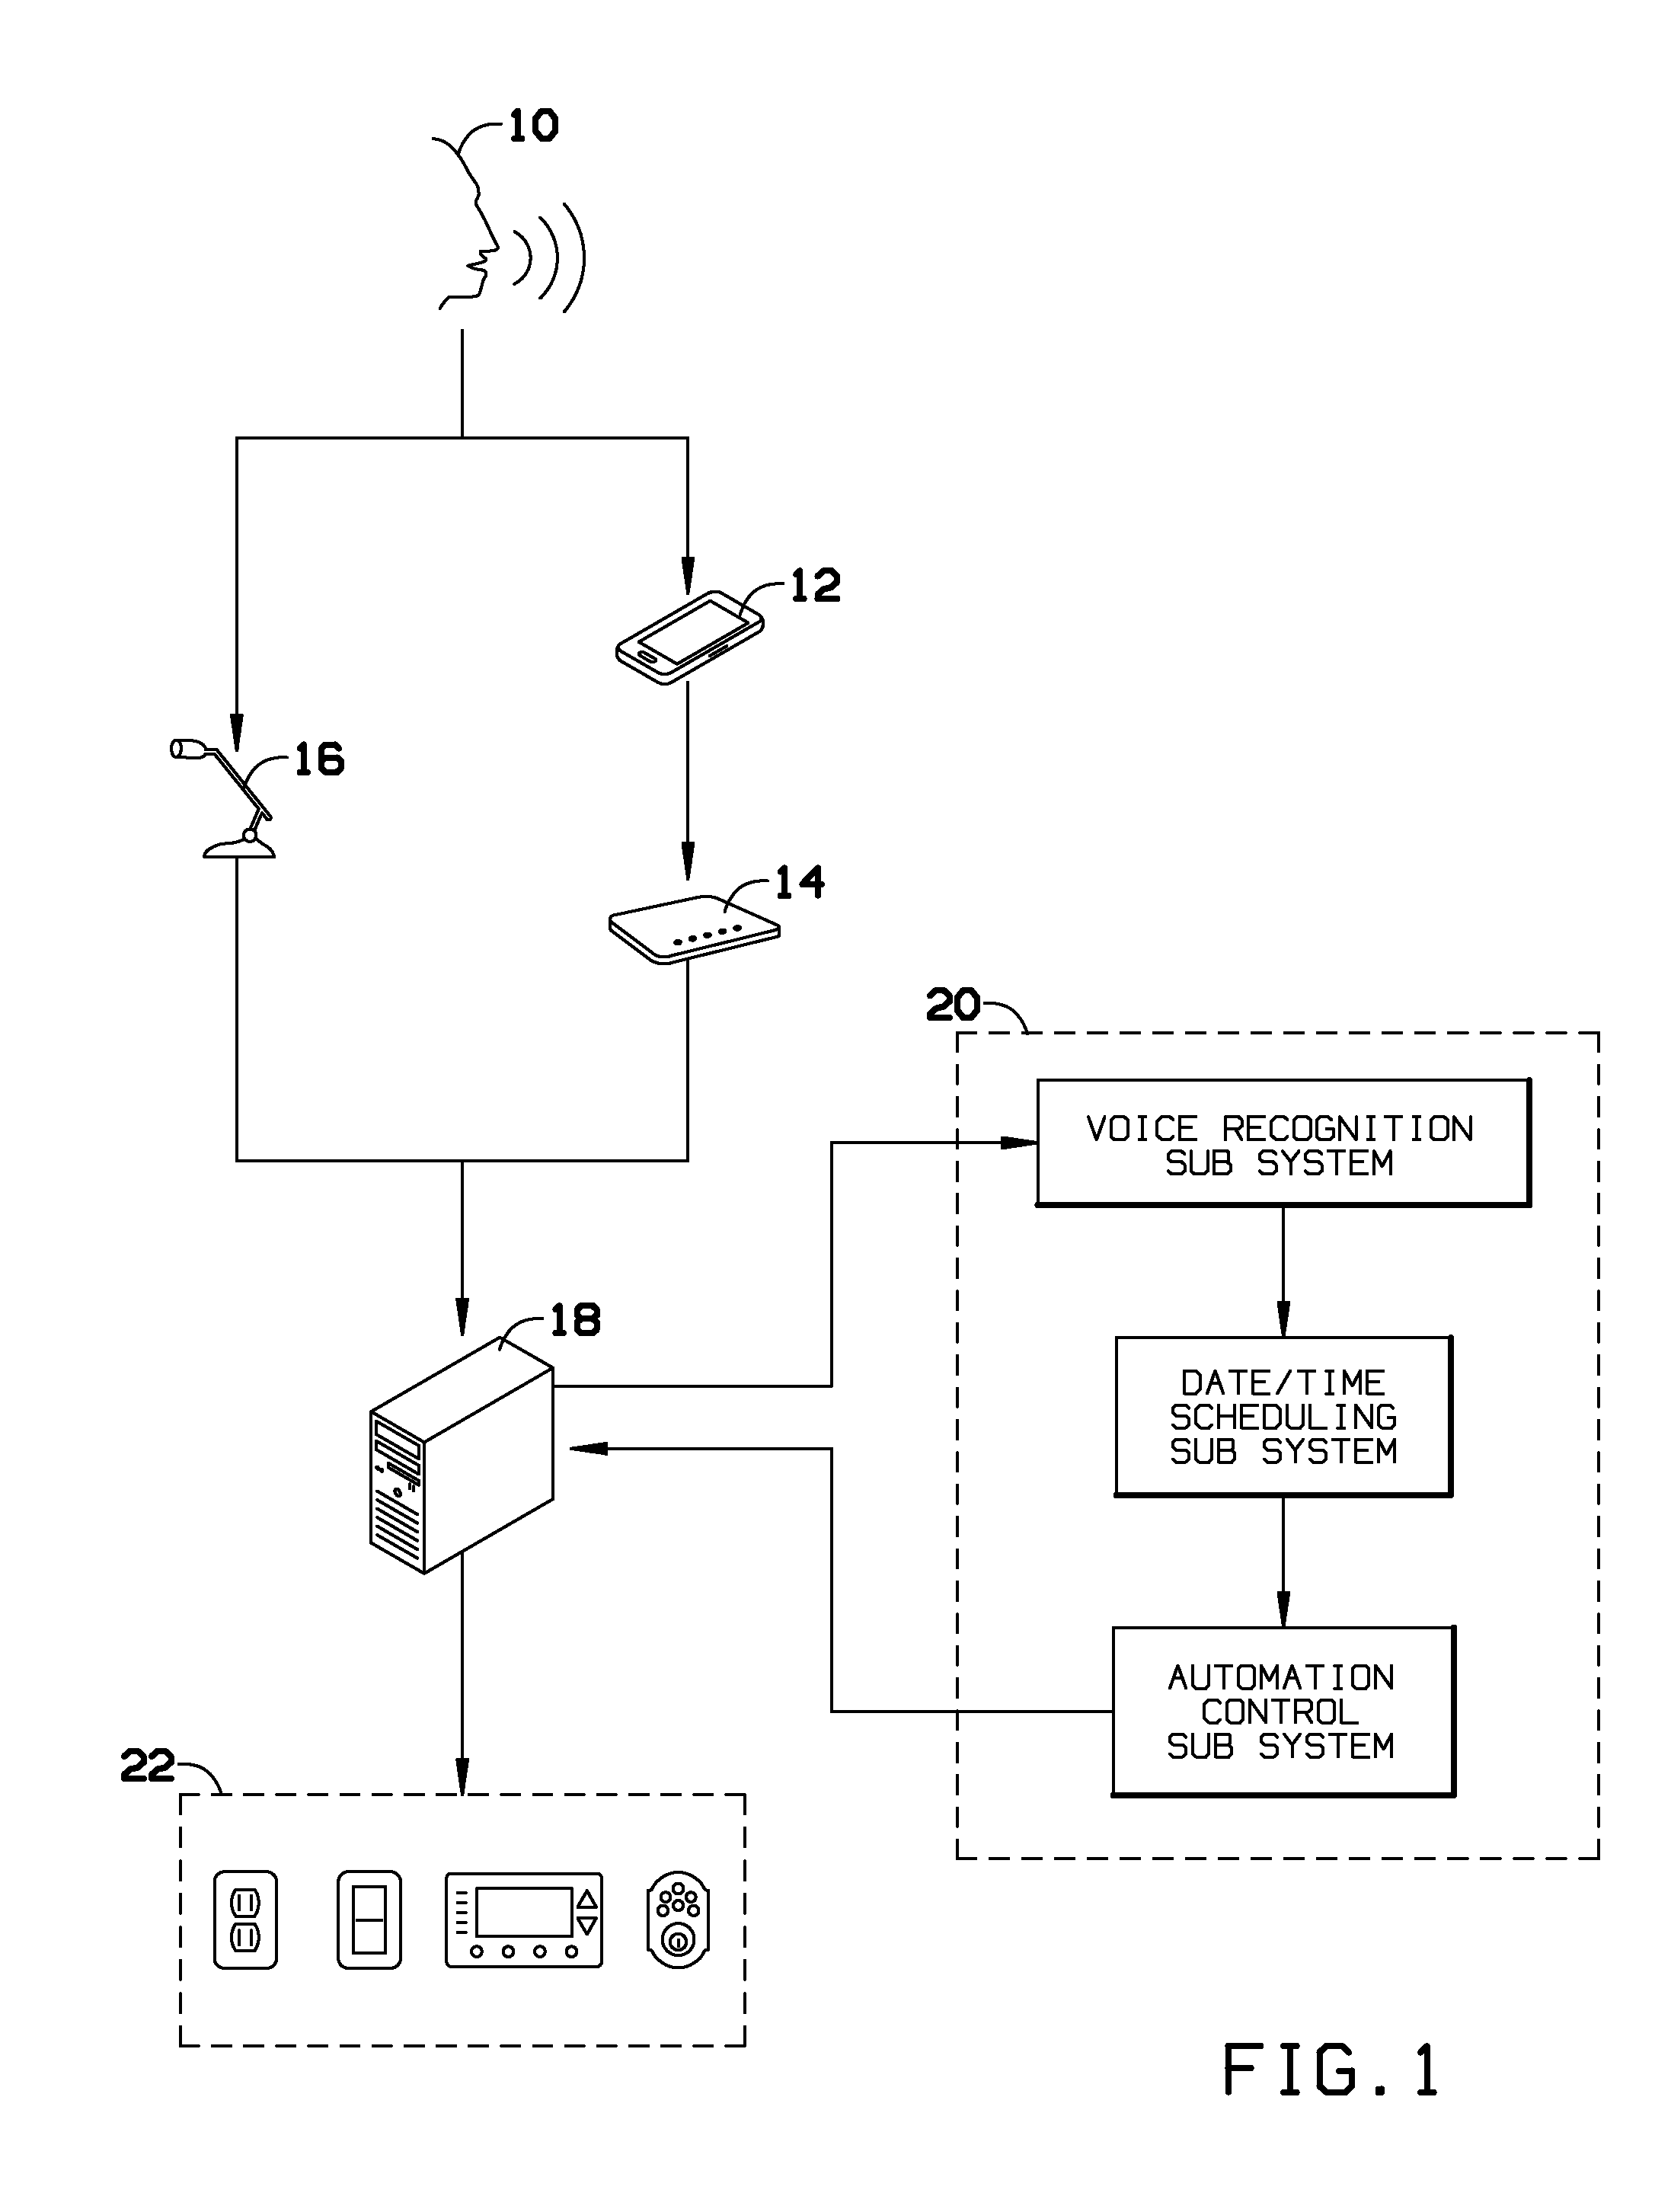 Voice command for control of automation systems